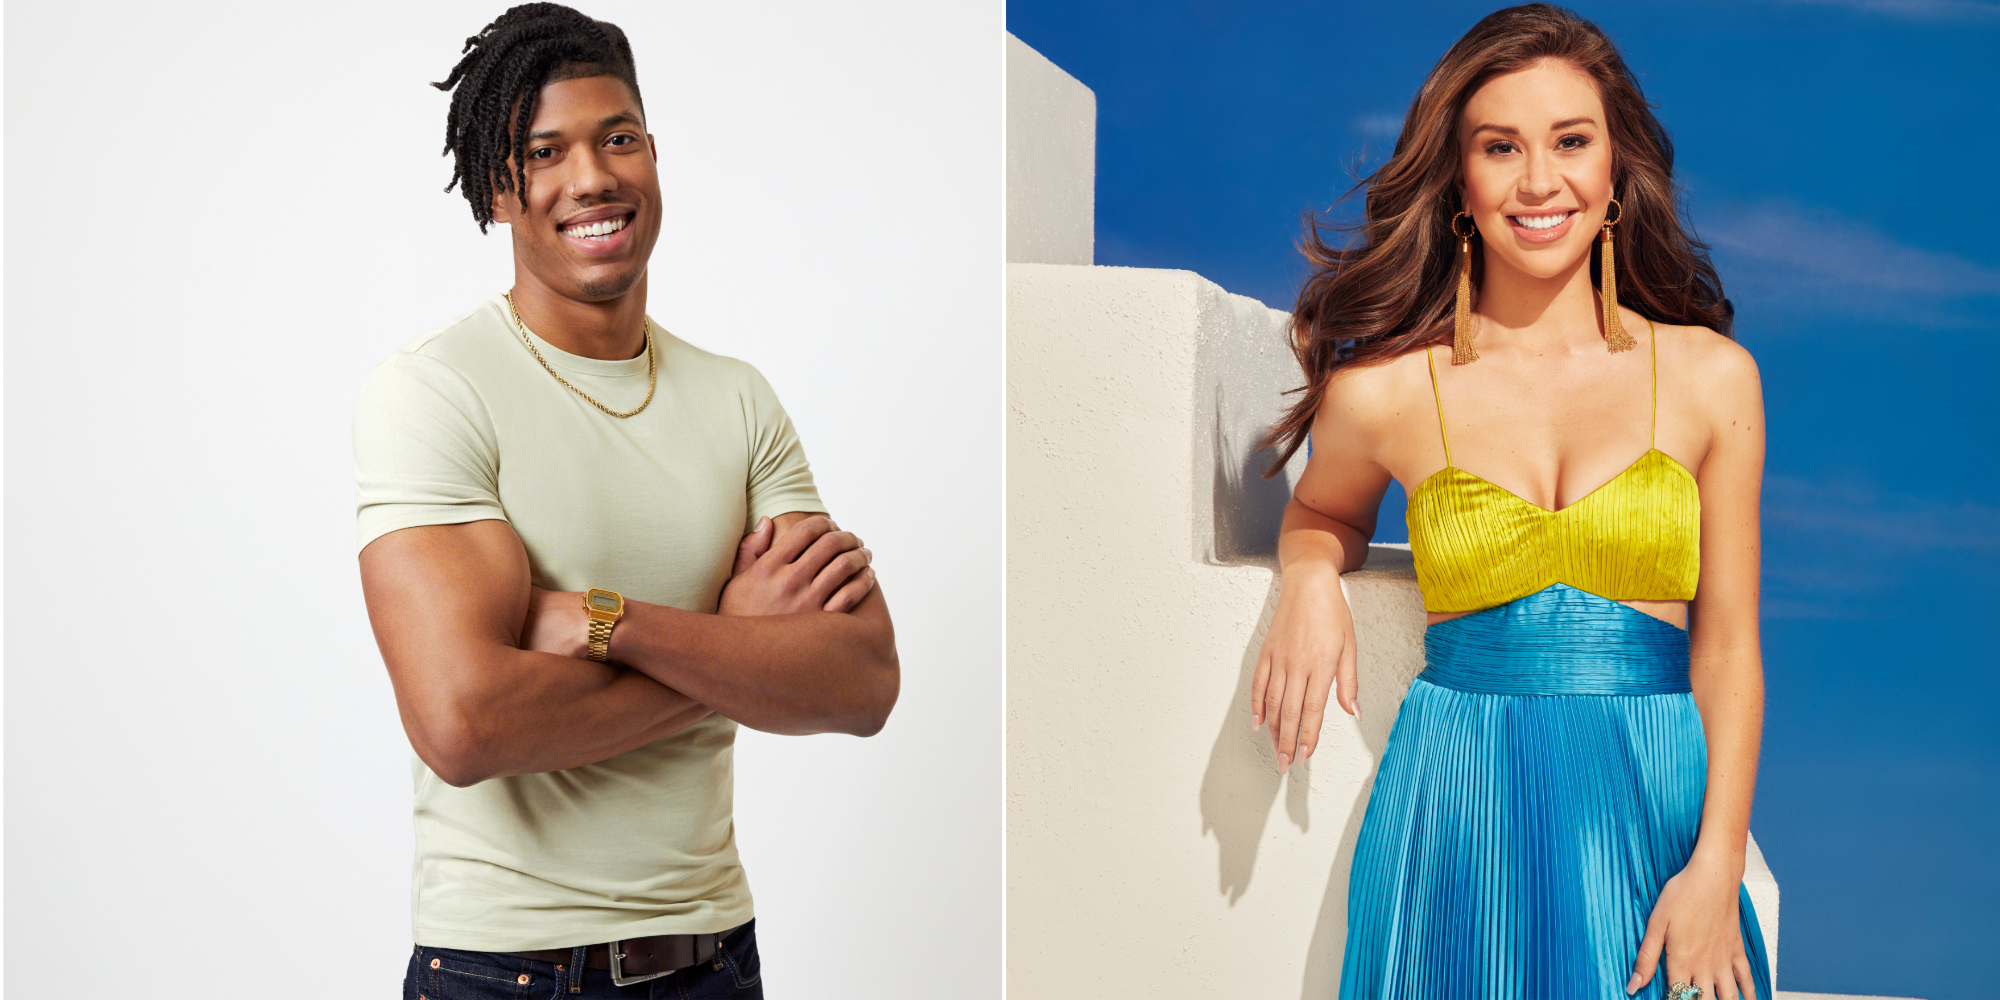 'The Bachelorette' star Nate Mitchell and Gabby Windey in side by side photographs.